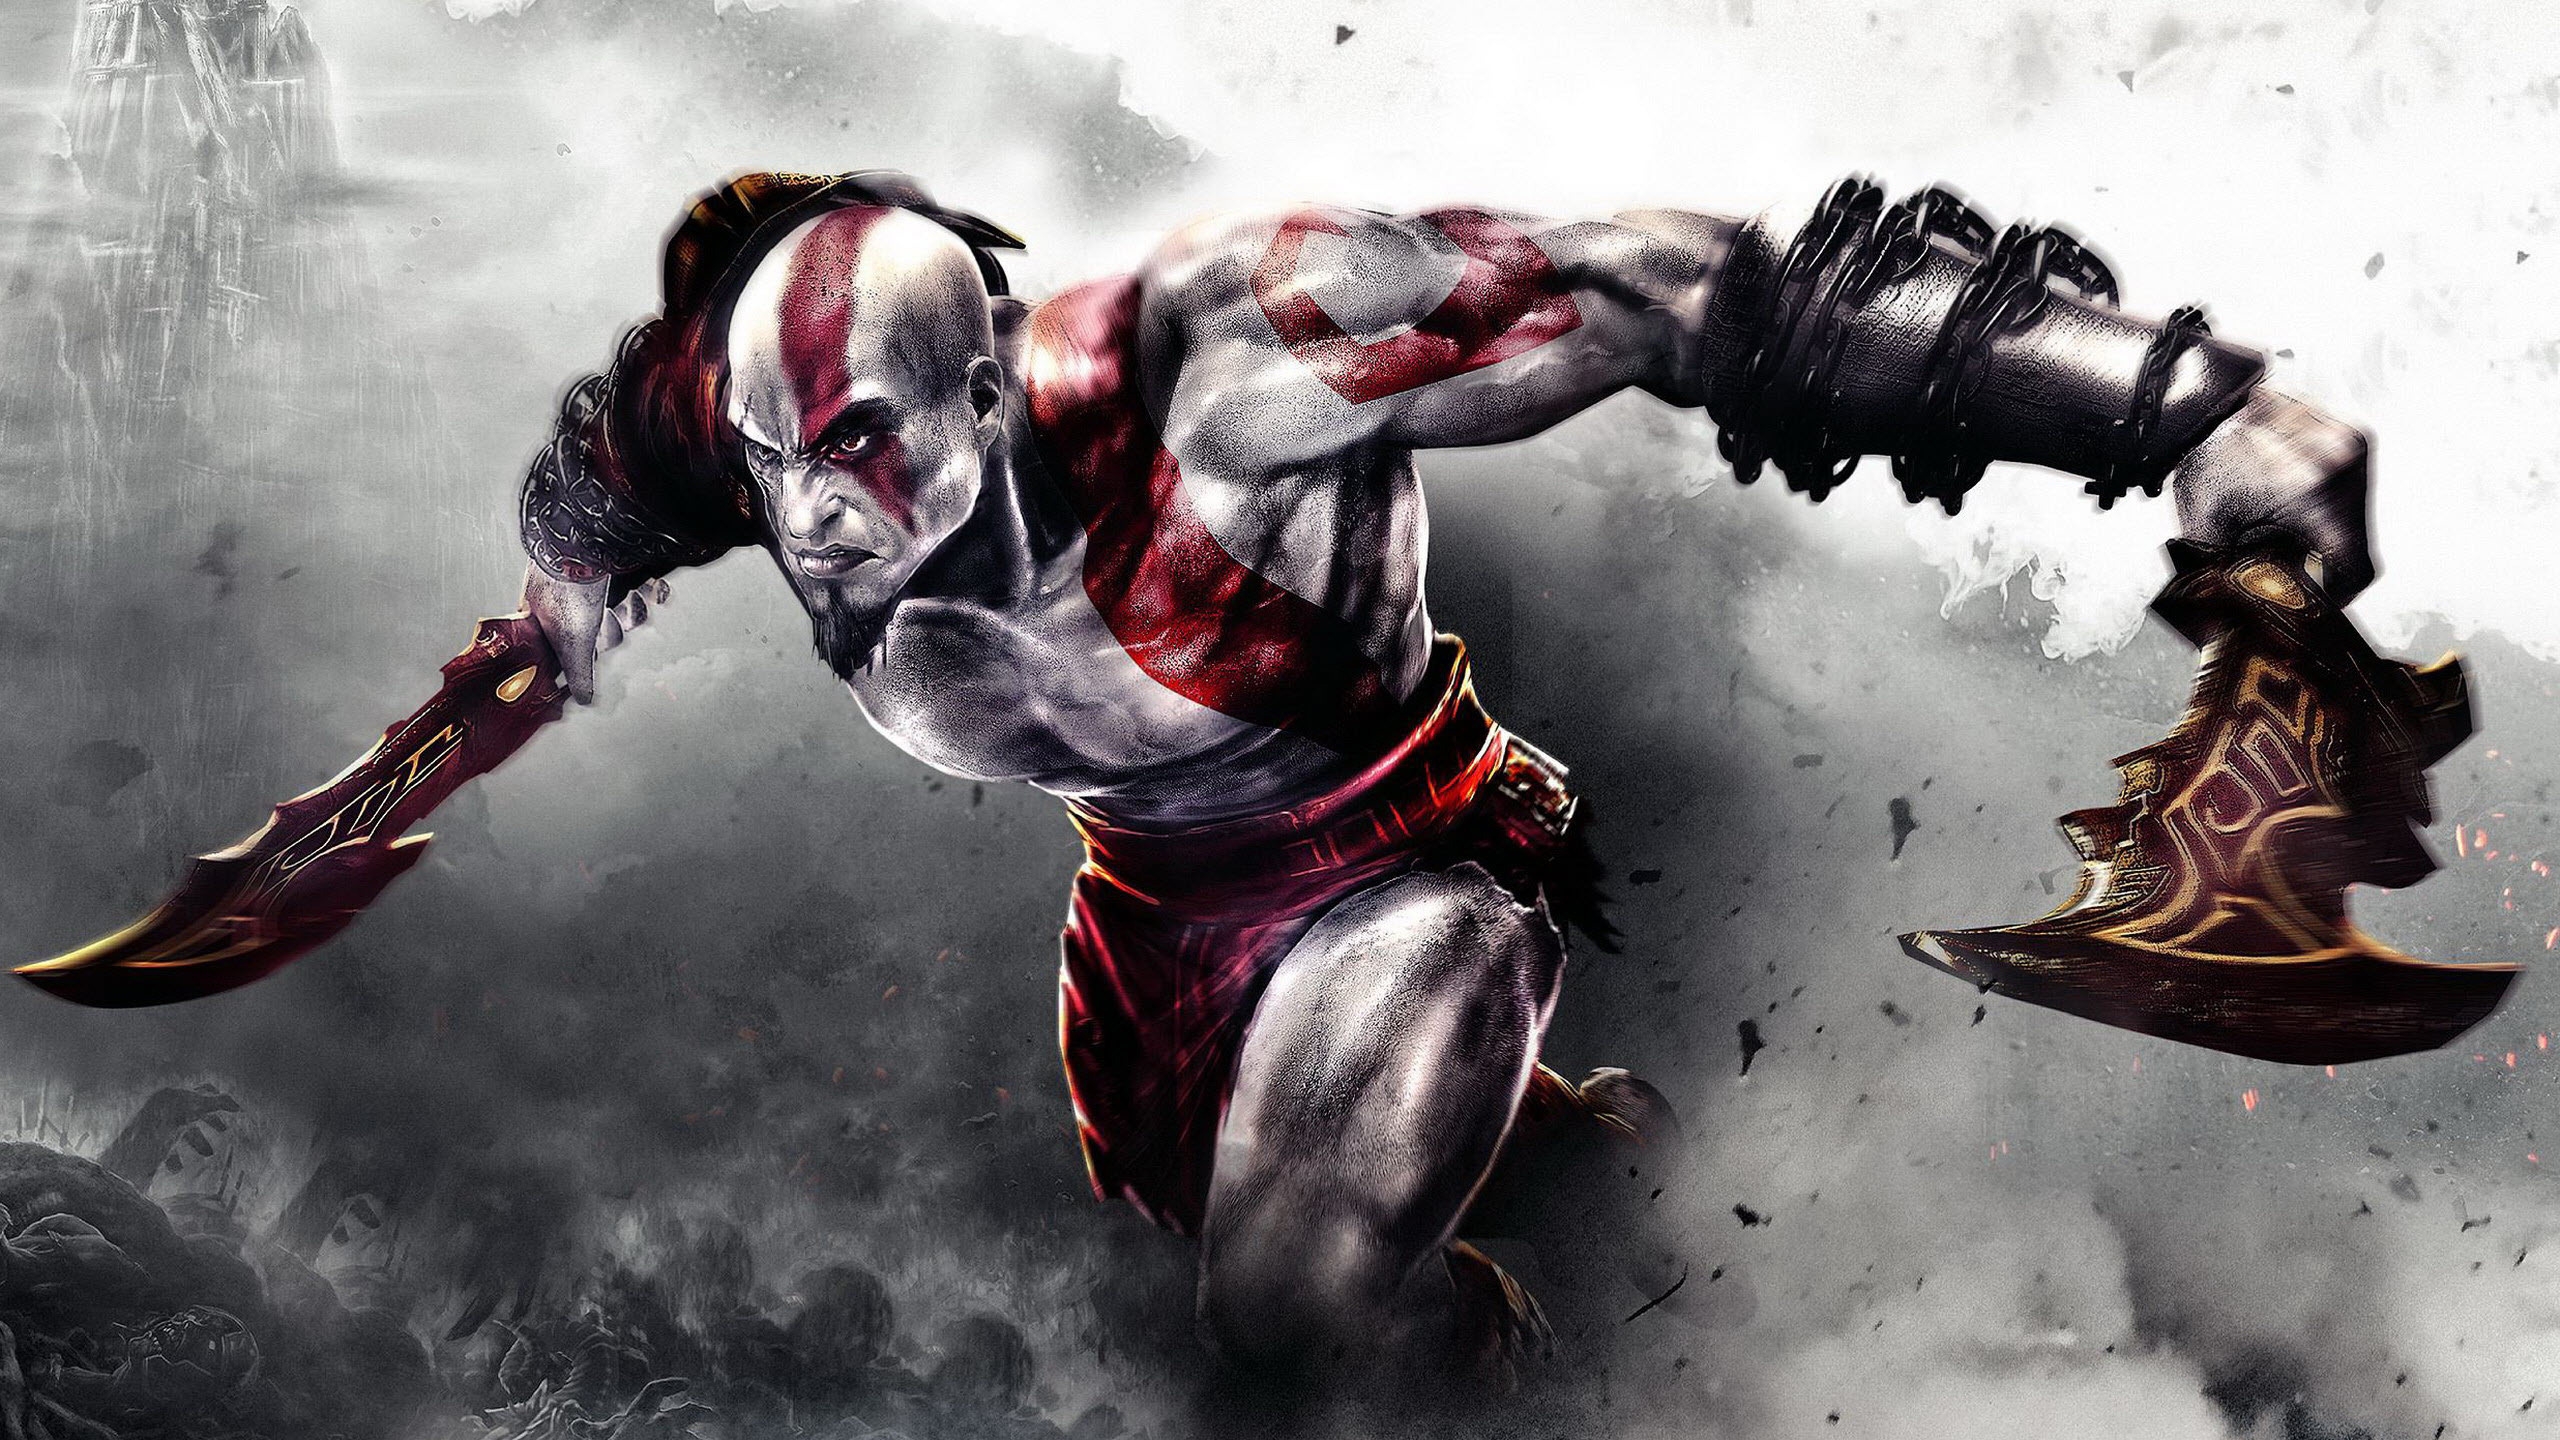 Angry Kratos for 2560x1440 HDTV resolution